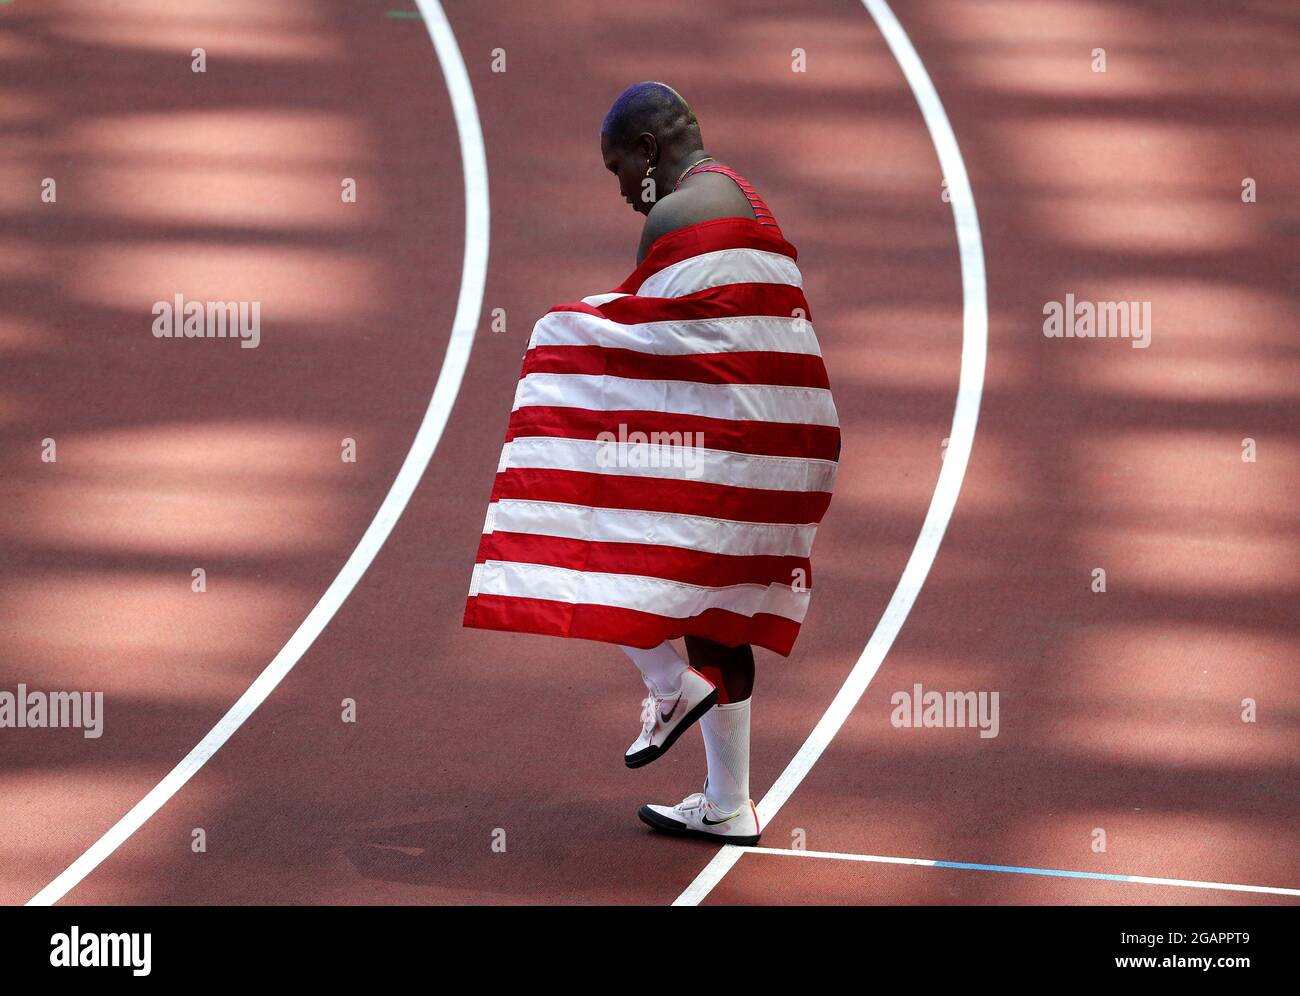 Tokyo, Japan. 31st July, 2021. Raven Saunders of the USA holds the national flag after winning the silver medal in Women's Shot Put at the Athletics competition during the Tokyo Summer Olympics in Tokyo, Japan, on Sunday, August 1, 2021. Photo by Bob Strong/UPI. Credit: UPI/Alamy Live News Stock Photo